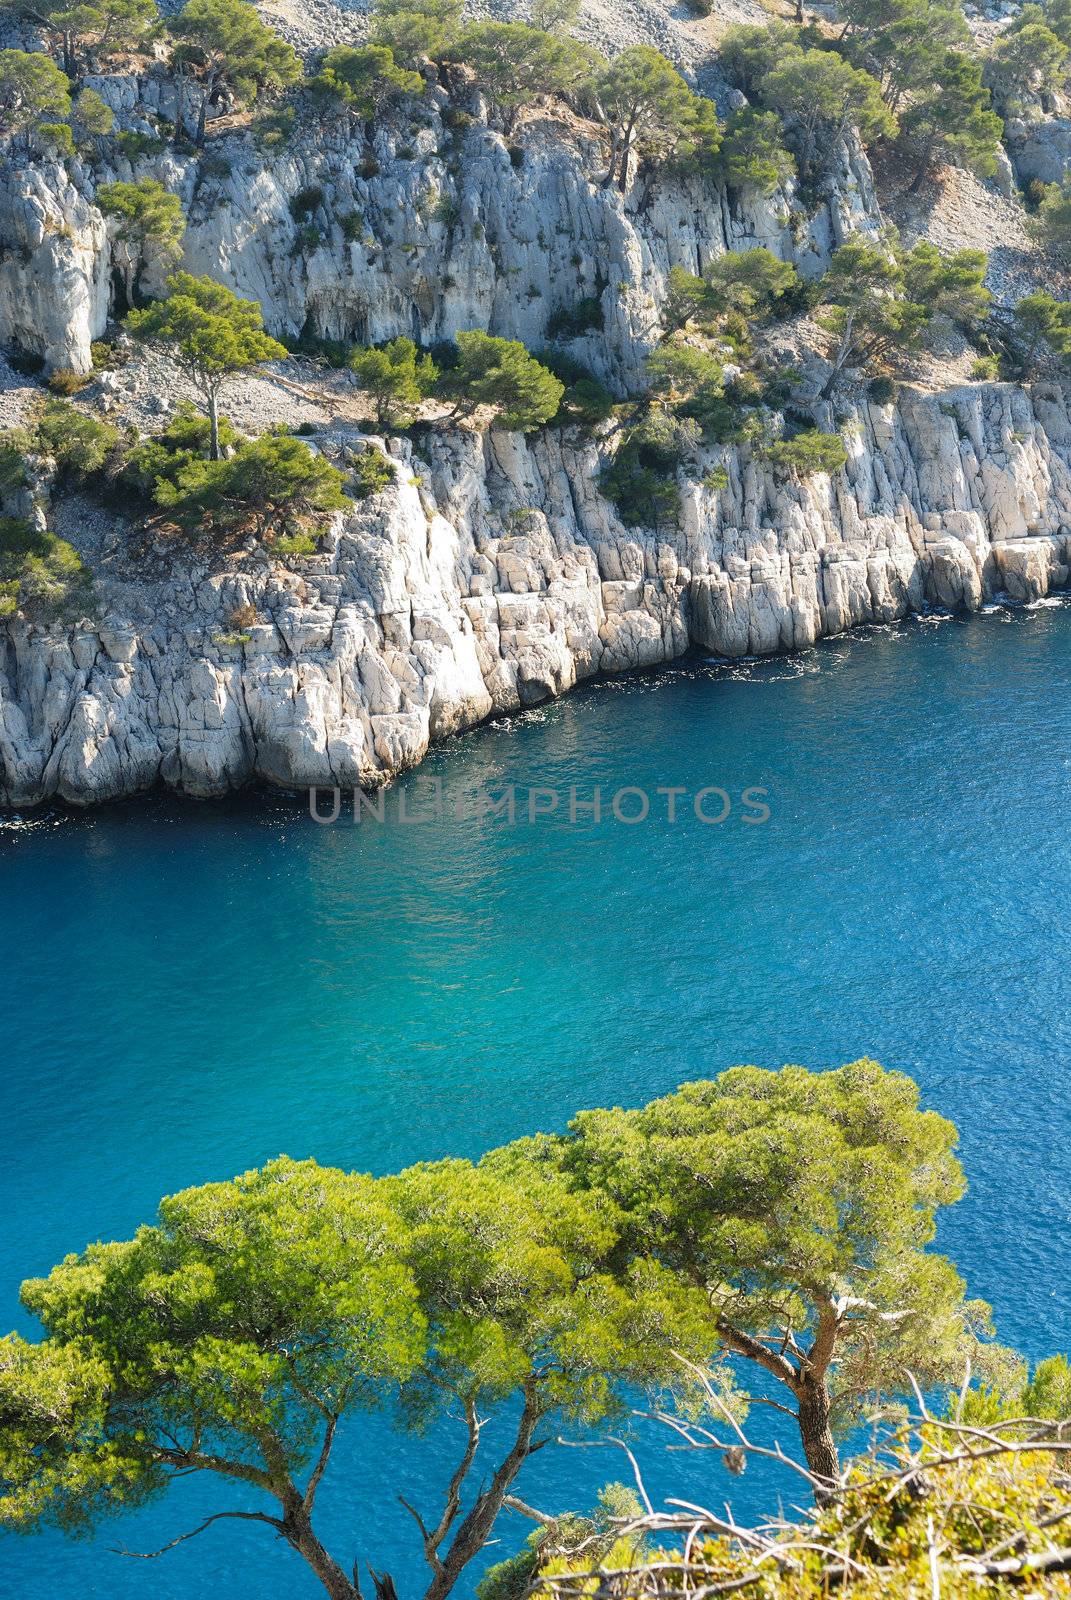 The famous Calanques of Cassis, along Mediterranean Sea, near Marseille (France)